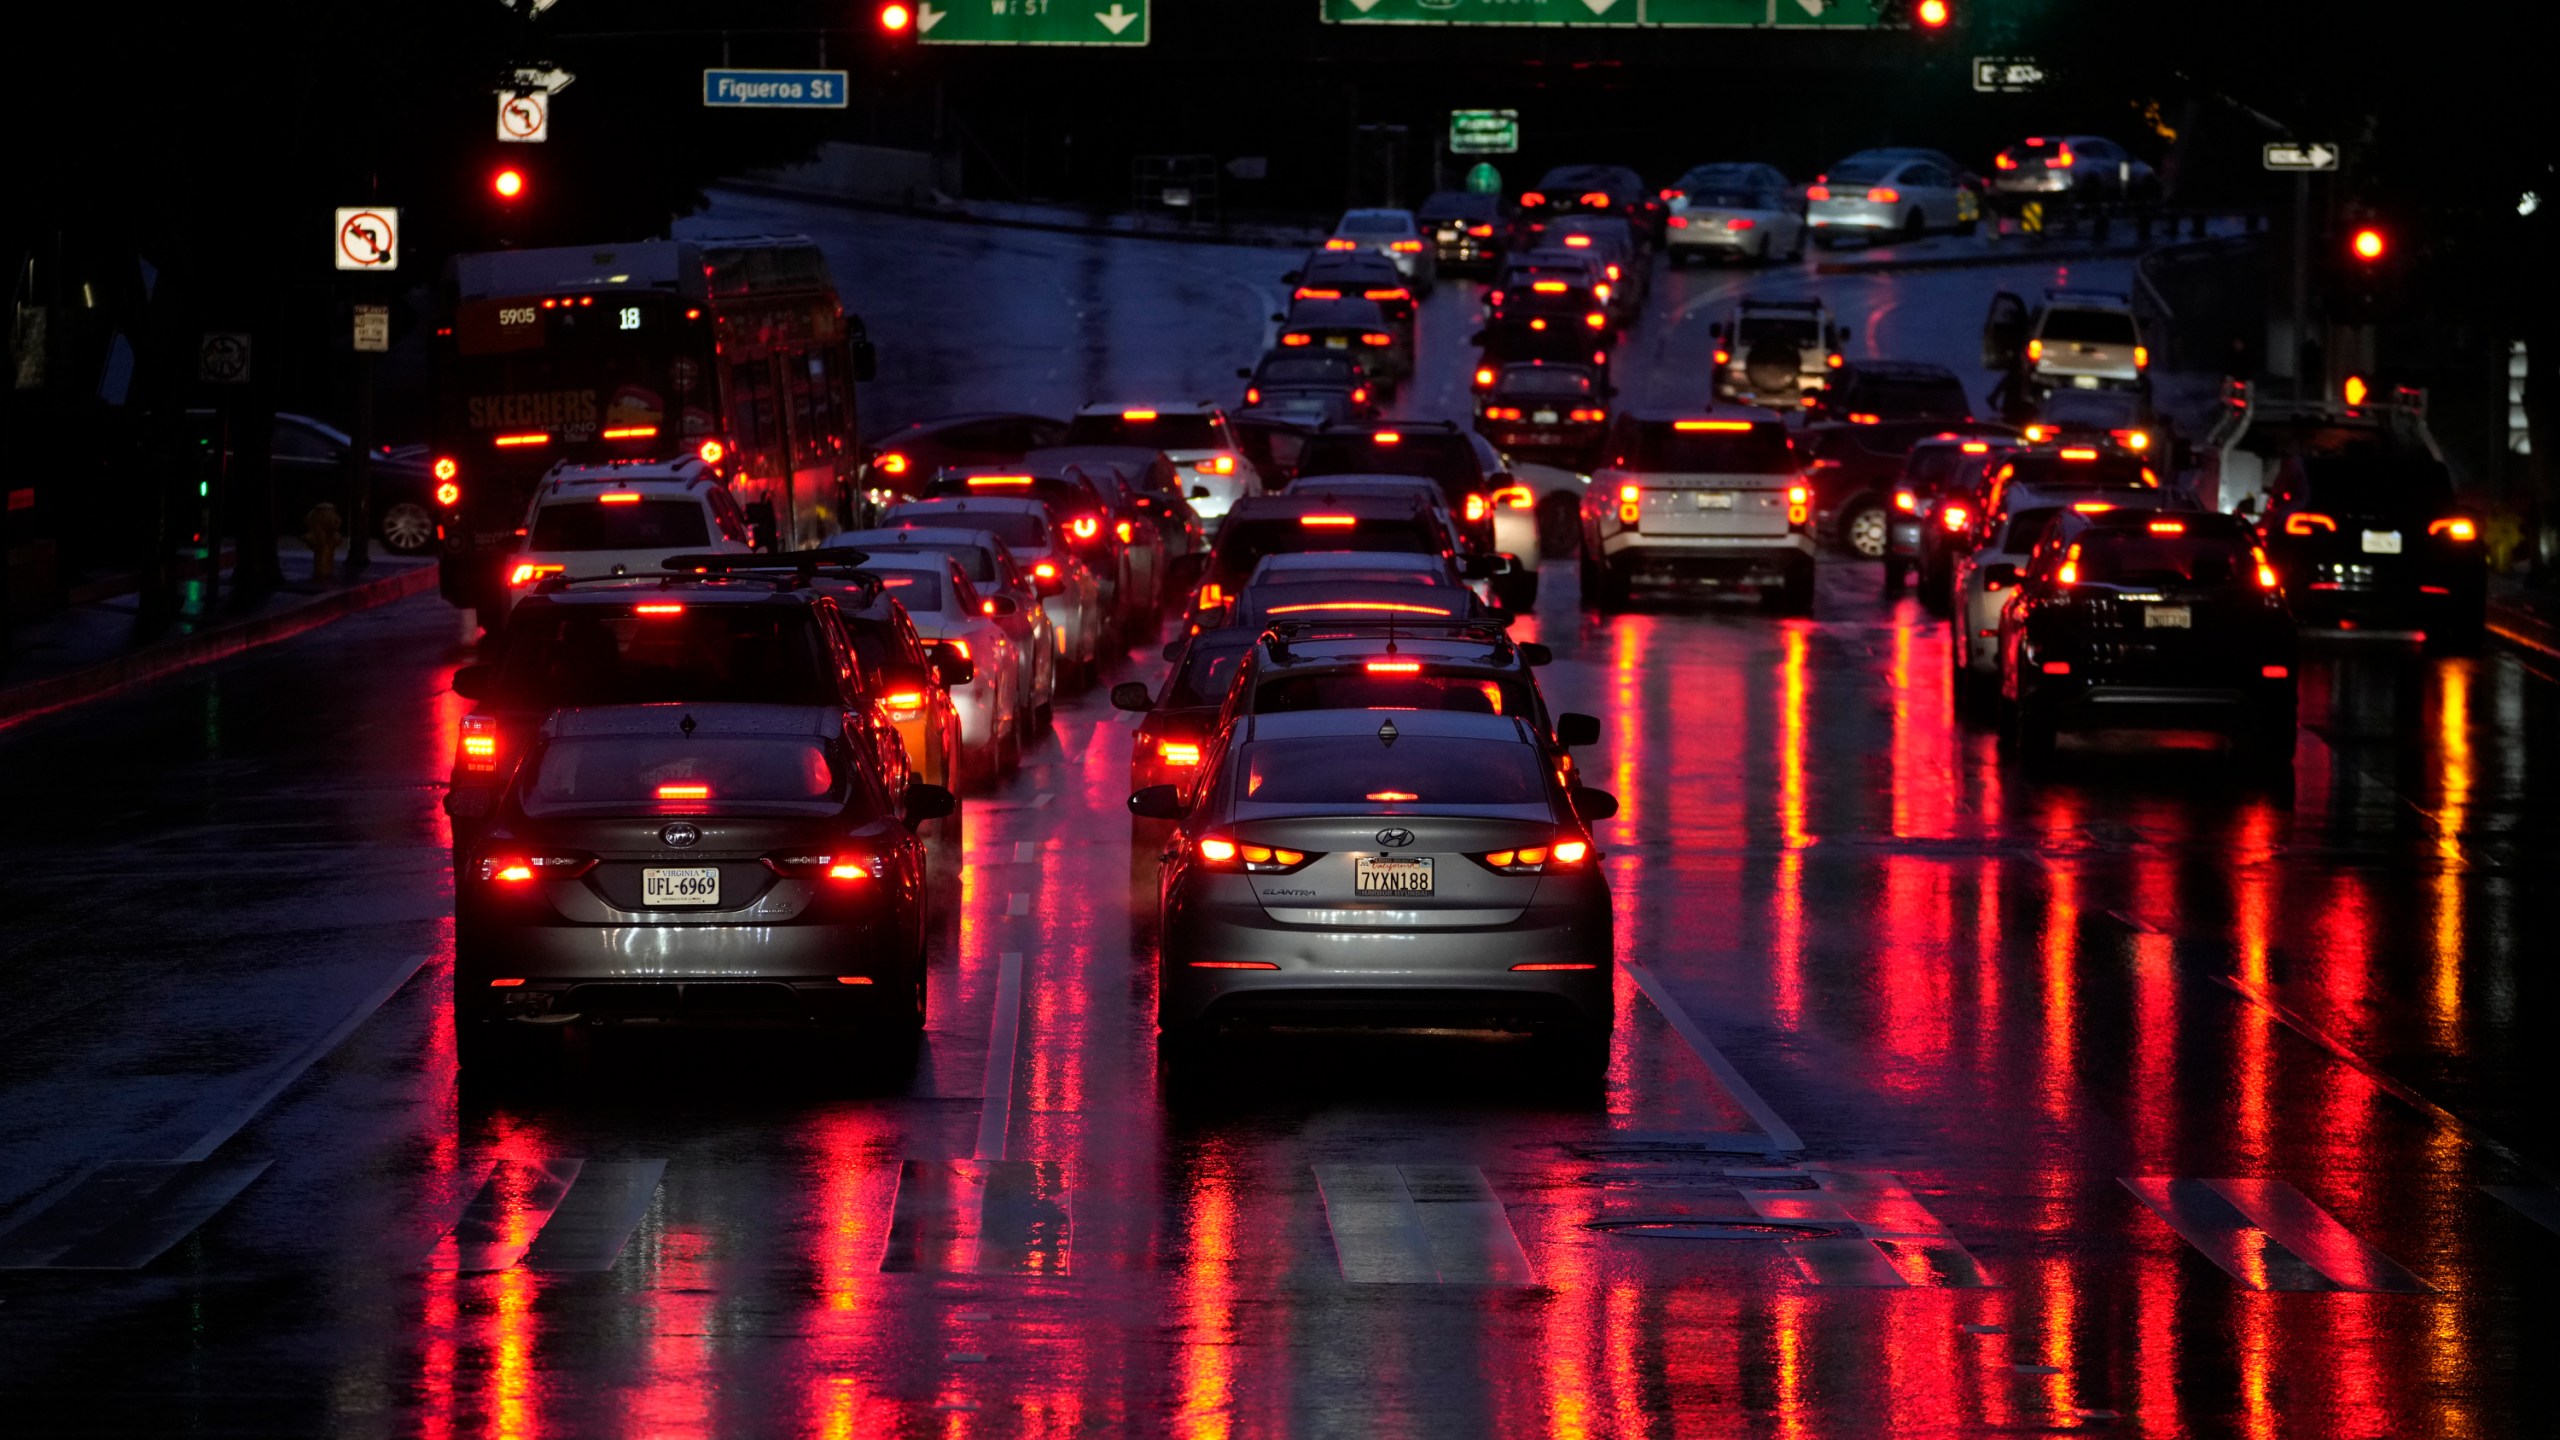 FILE - Car lights are reflected in the wet street as commuters line up in traffic to enter the I-110 Harbor freeway in the rain in downtown Los Angeles, March 6, 2024. Most electronic systems that take on some driving tasks for humans don’t adequately make sure drivers are paying attention, and they don’t issue strong enough warnings to make drivers behave. That's according to an insurance industry study published Tuesday, March 12, 2024. (AP Photo/Damian Dovarganes, File)